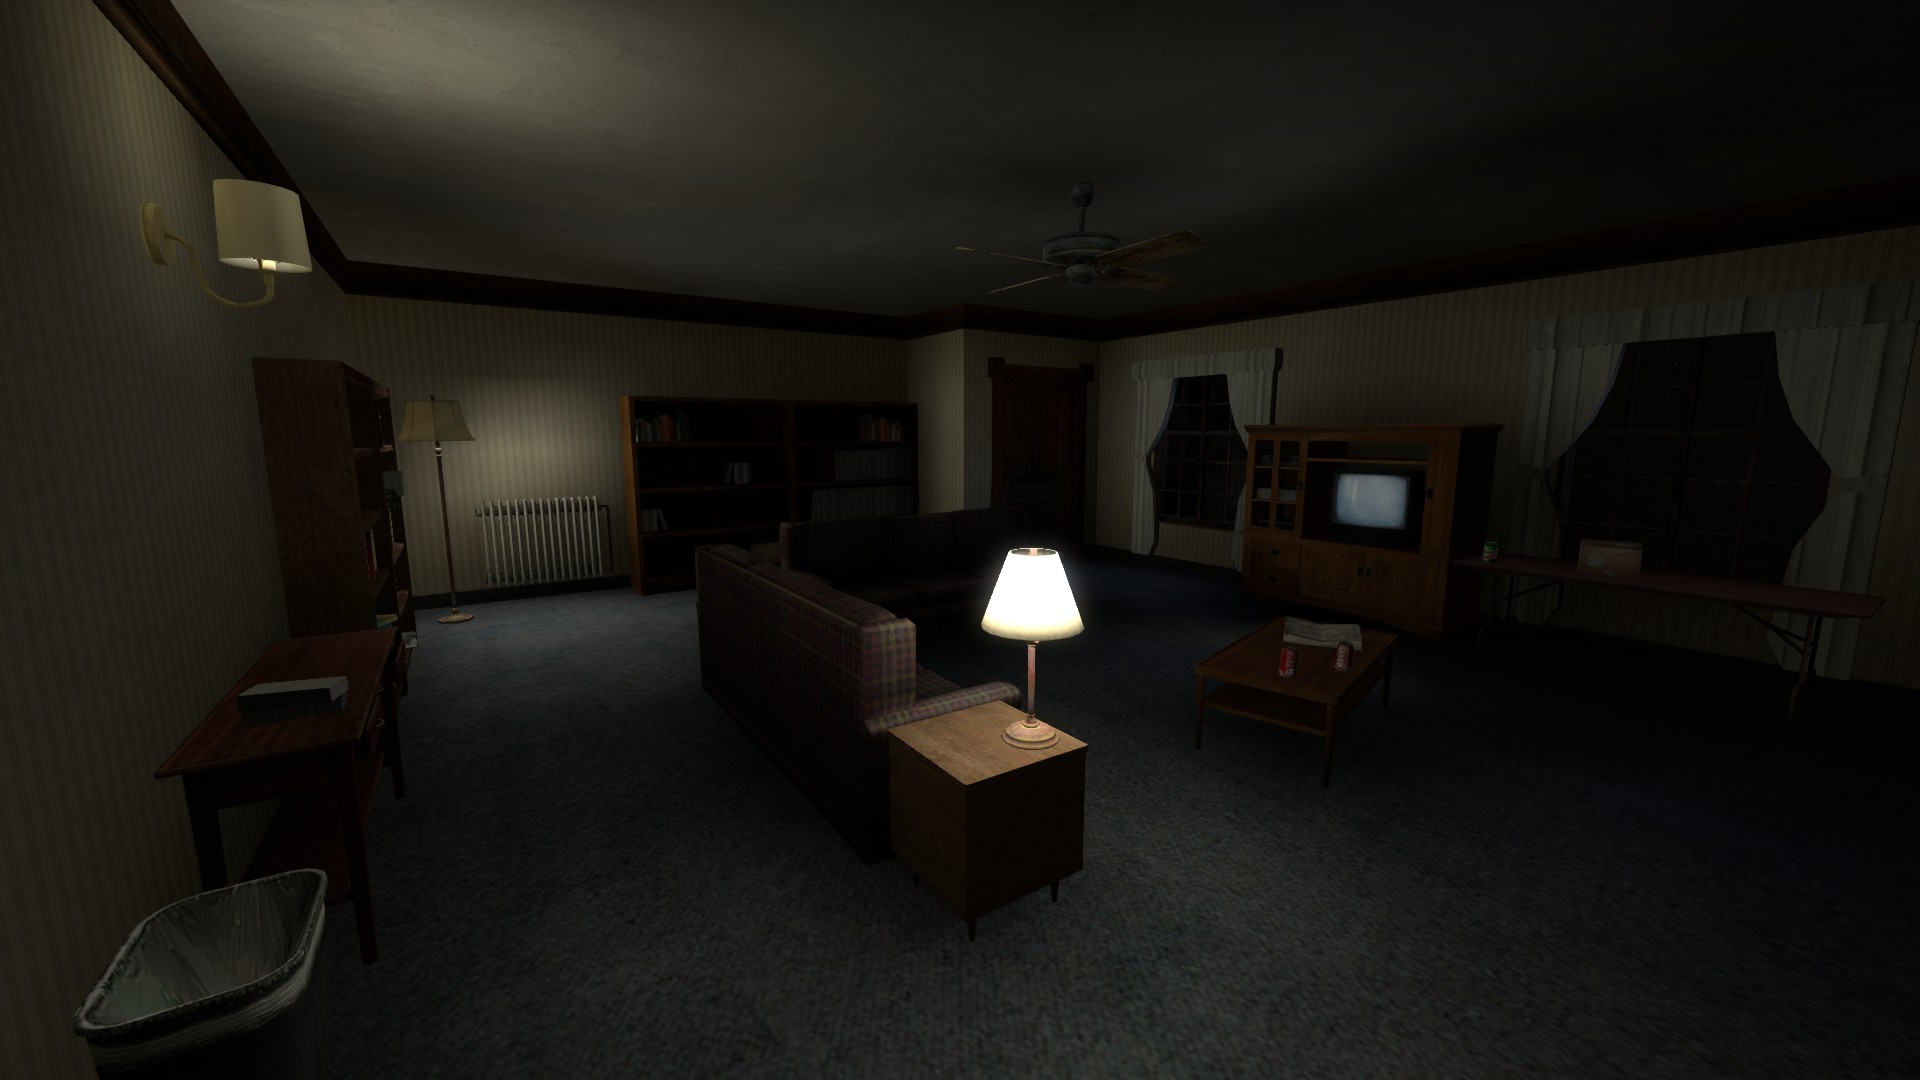 Gone Home Map For Counter-Strike Lets You Defuse Bombs, Emotions